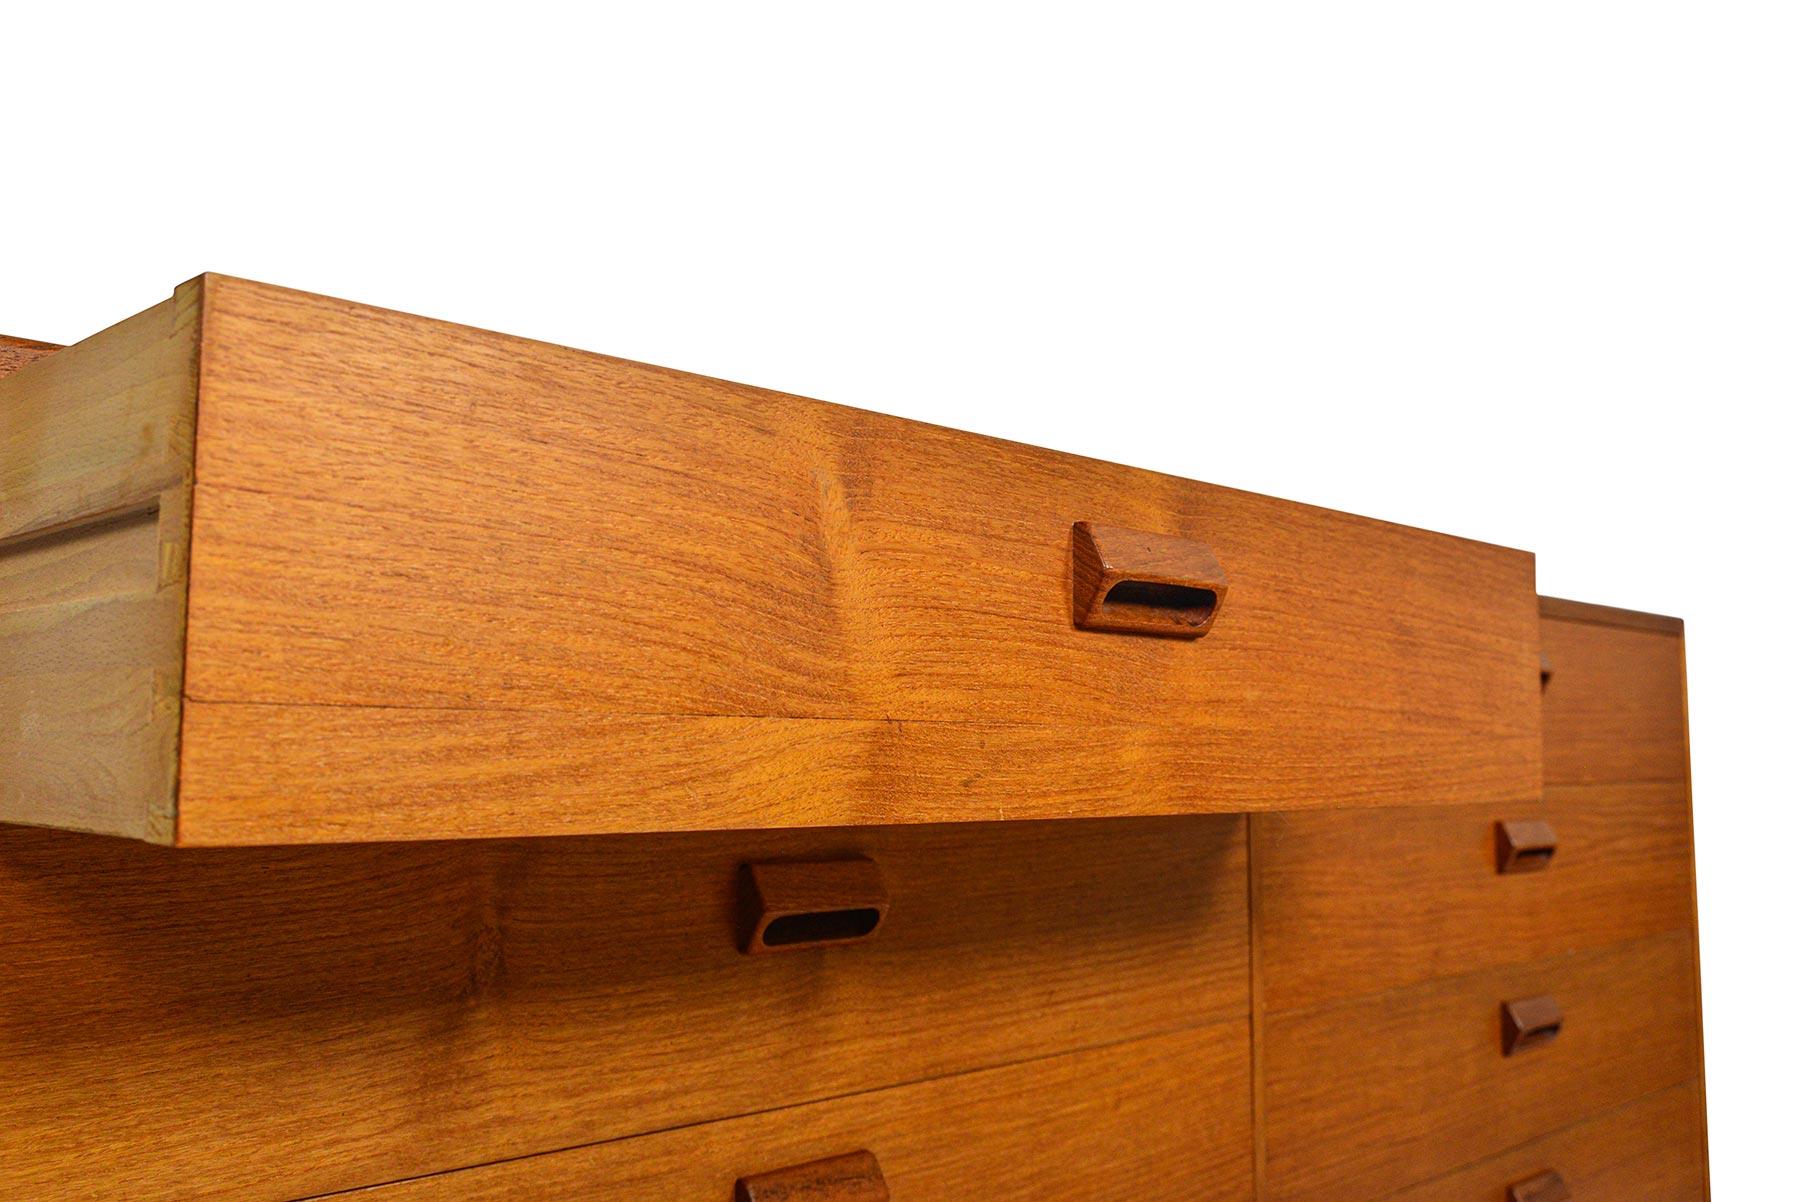 This beautiful low double dresser was designed by Børge Mogensen for Søborg Møbelfabrik in the 1950s. The case is expertly crafted in teak and stands on a solid teak base. Each drawer front is adorned with the designer’s signature handle. Eight deep